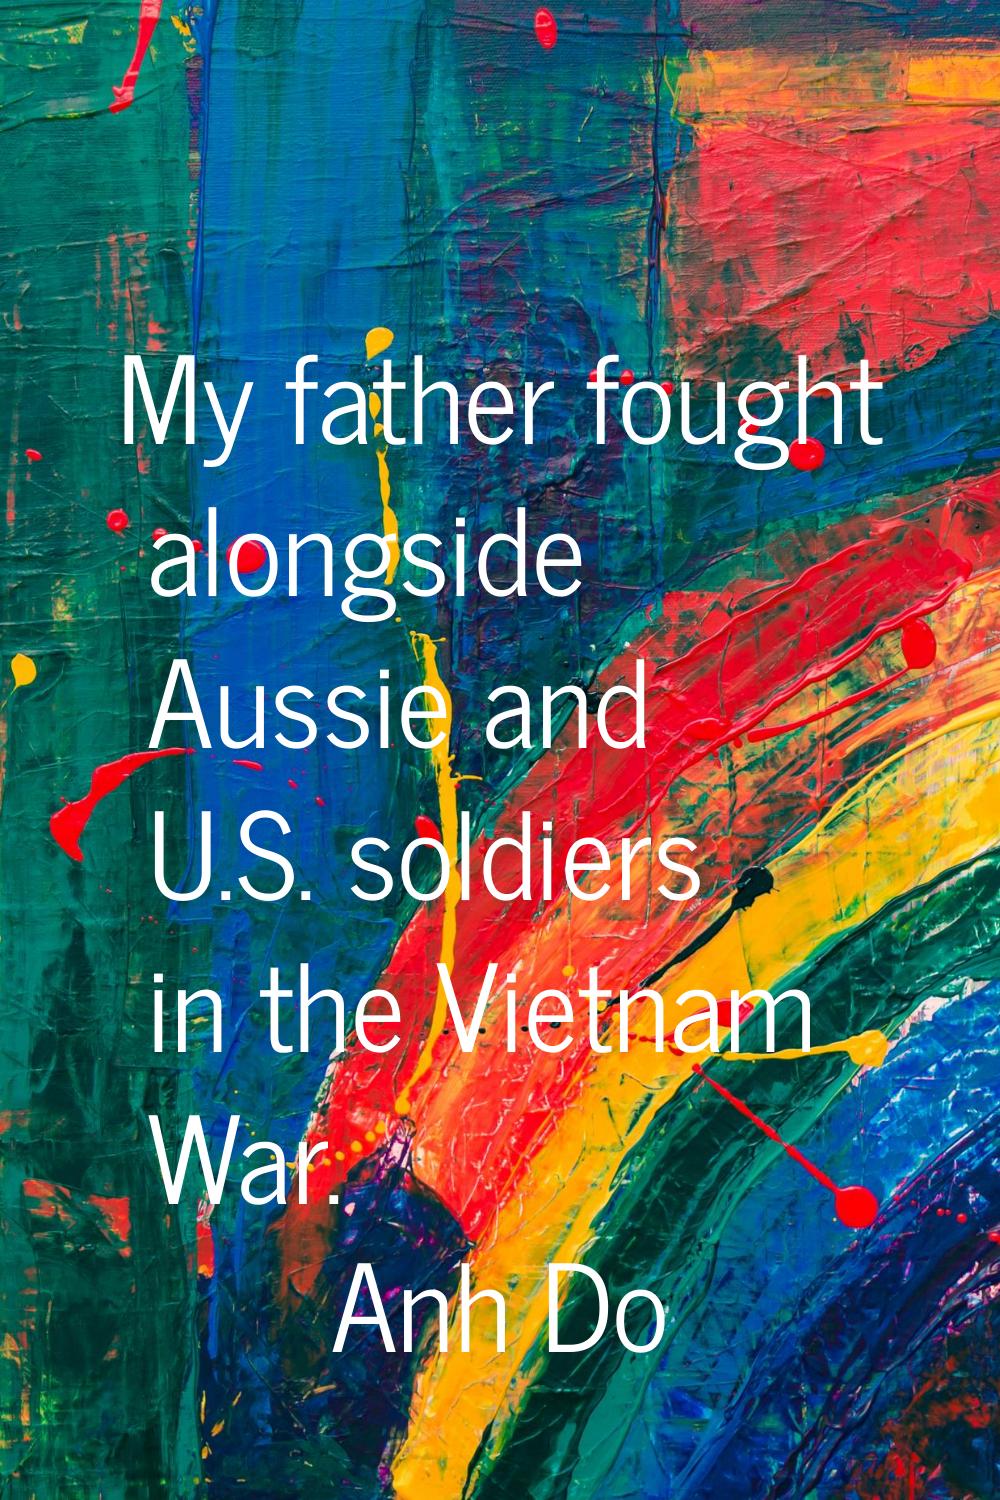 My father fought alongside Aussie and U.S. soldiers in the Vietnam War.